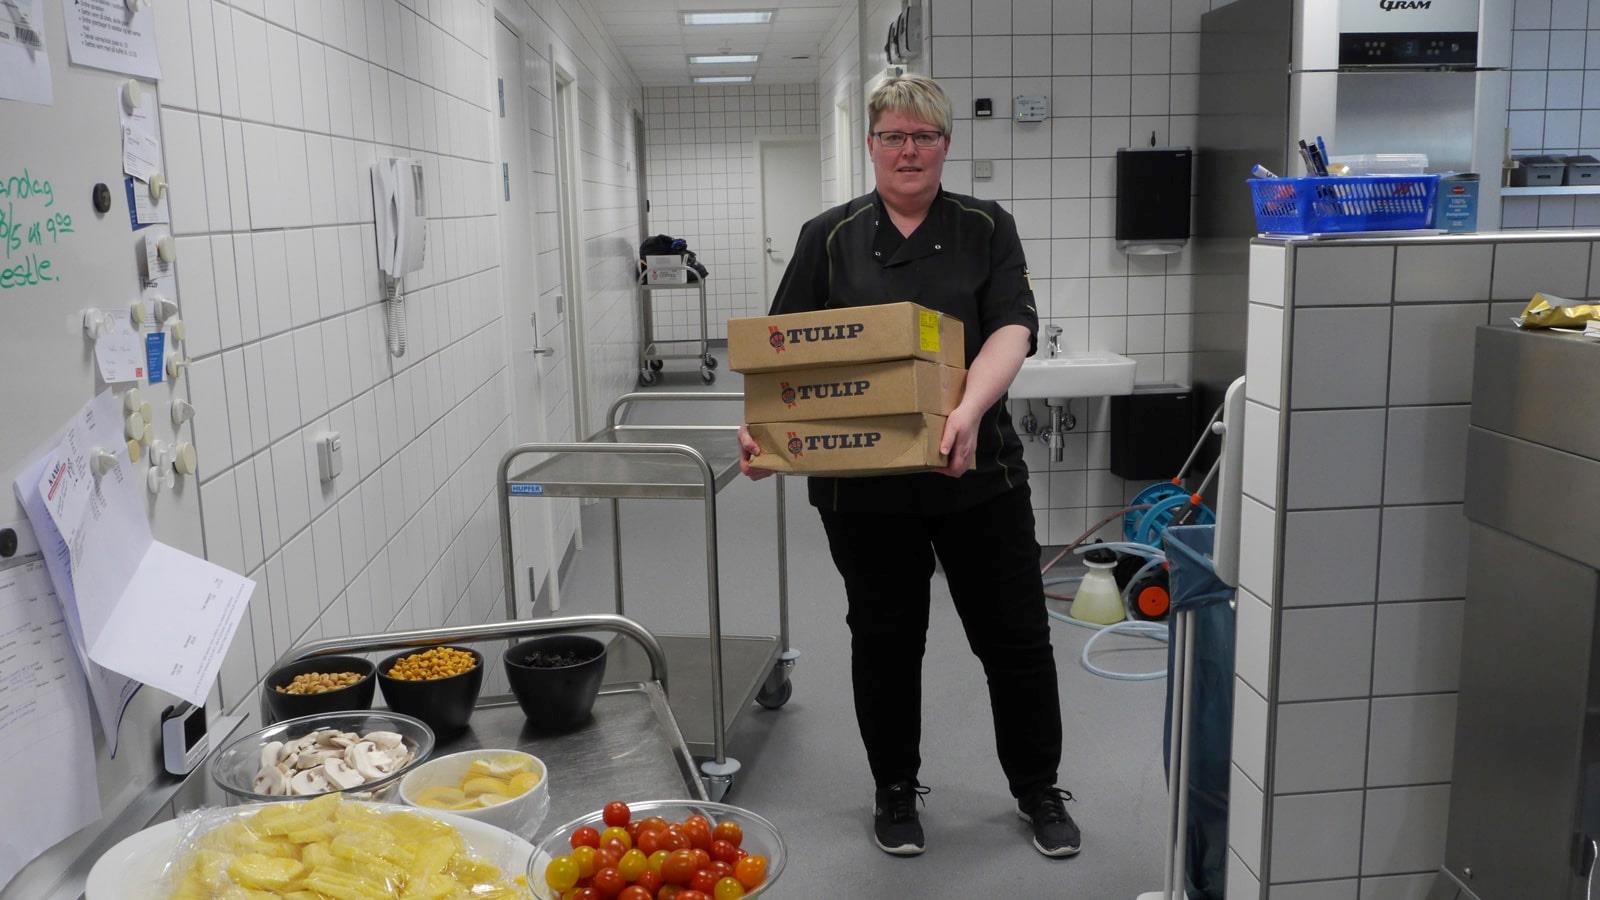 Canteen employee carrying boxes with Tulip meat products